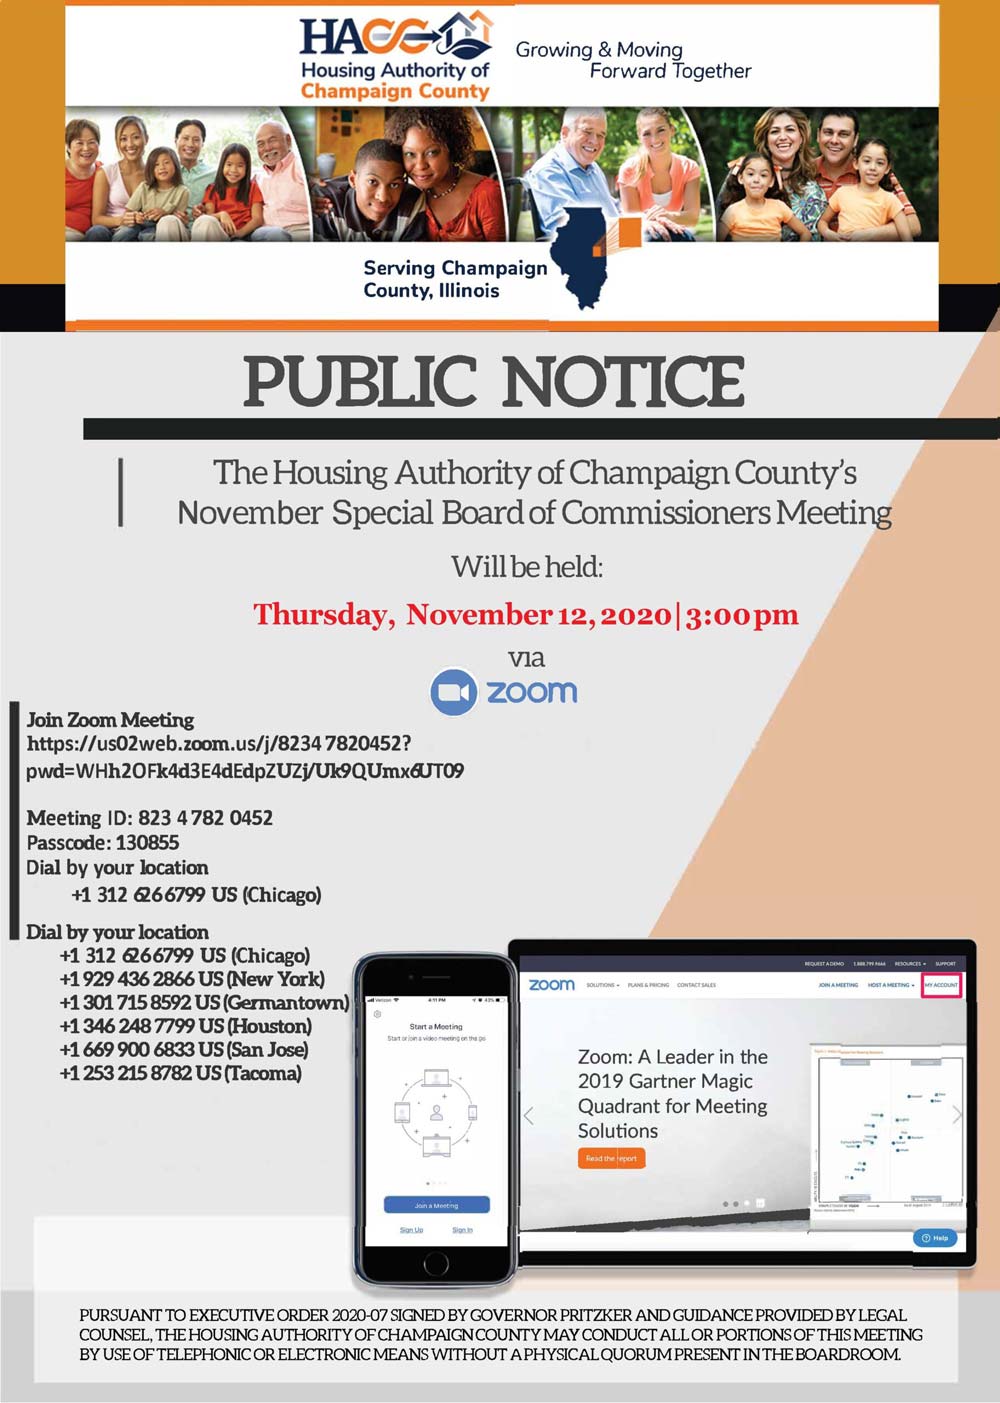 November Special Board of Commissioners Meeting flyer, all information as listed below.